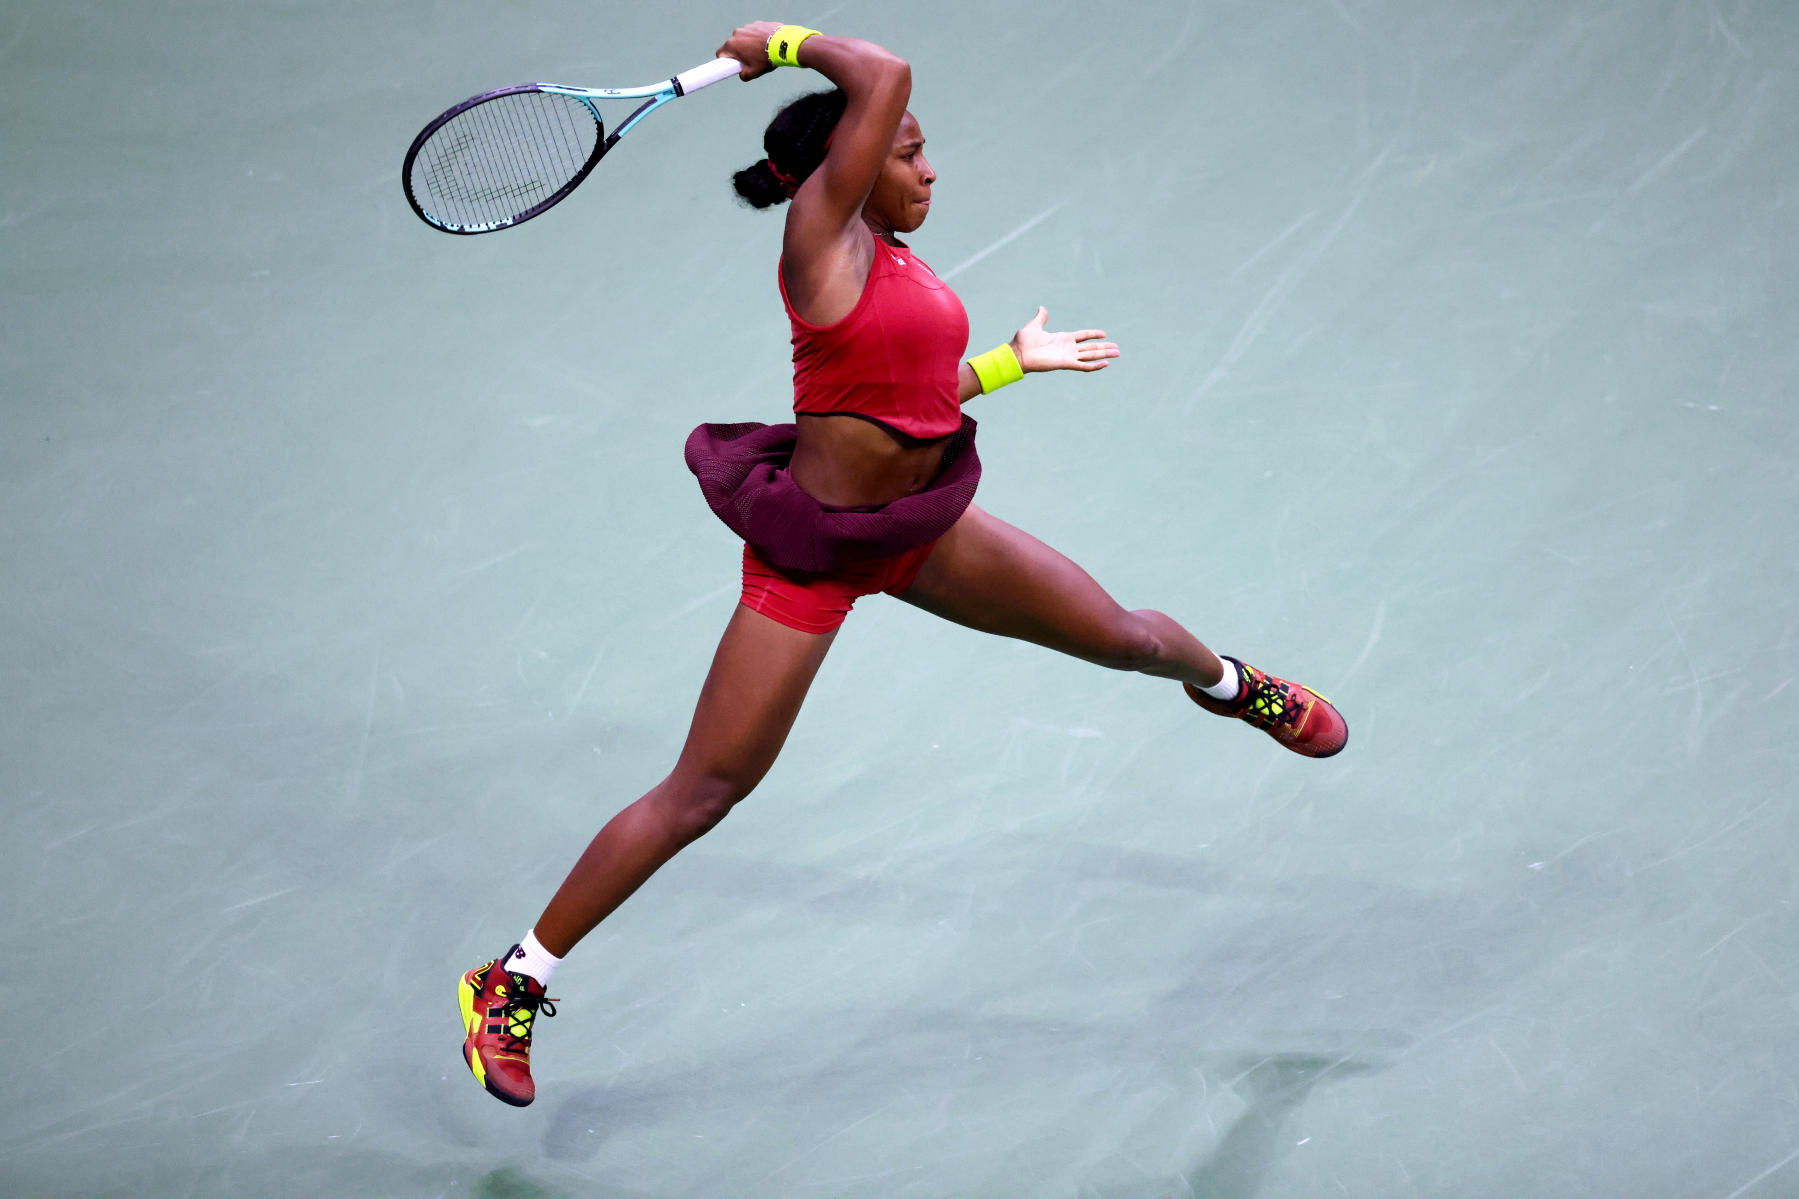 <h4 style="text-transform:uppercase">Coco Gauff, 2023 US Open Women's Final</h4>
<div class="captiontext">
This image of Coco Gauff during the recent 2023 US Open Women's final highlights her intense athleticism as well as a creativity which allowed her to capture the year's US Open title and her first, though most certainly not last, Grand Slam title.  It was hard not to feel the ushering in of a new era and generation with her victory, and the slow and steady approach to building her game and more importantly, her development as a whole person since she arrived on the seen at age 14 five years ago, is clearly starting to pay dividends.  
</div> : Tennis : Photography by Adam Stoltman: Sports Photography, The Arts, Portraiture, Travel, Photojournalism and Fine Art in New York